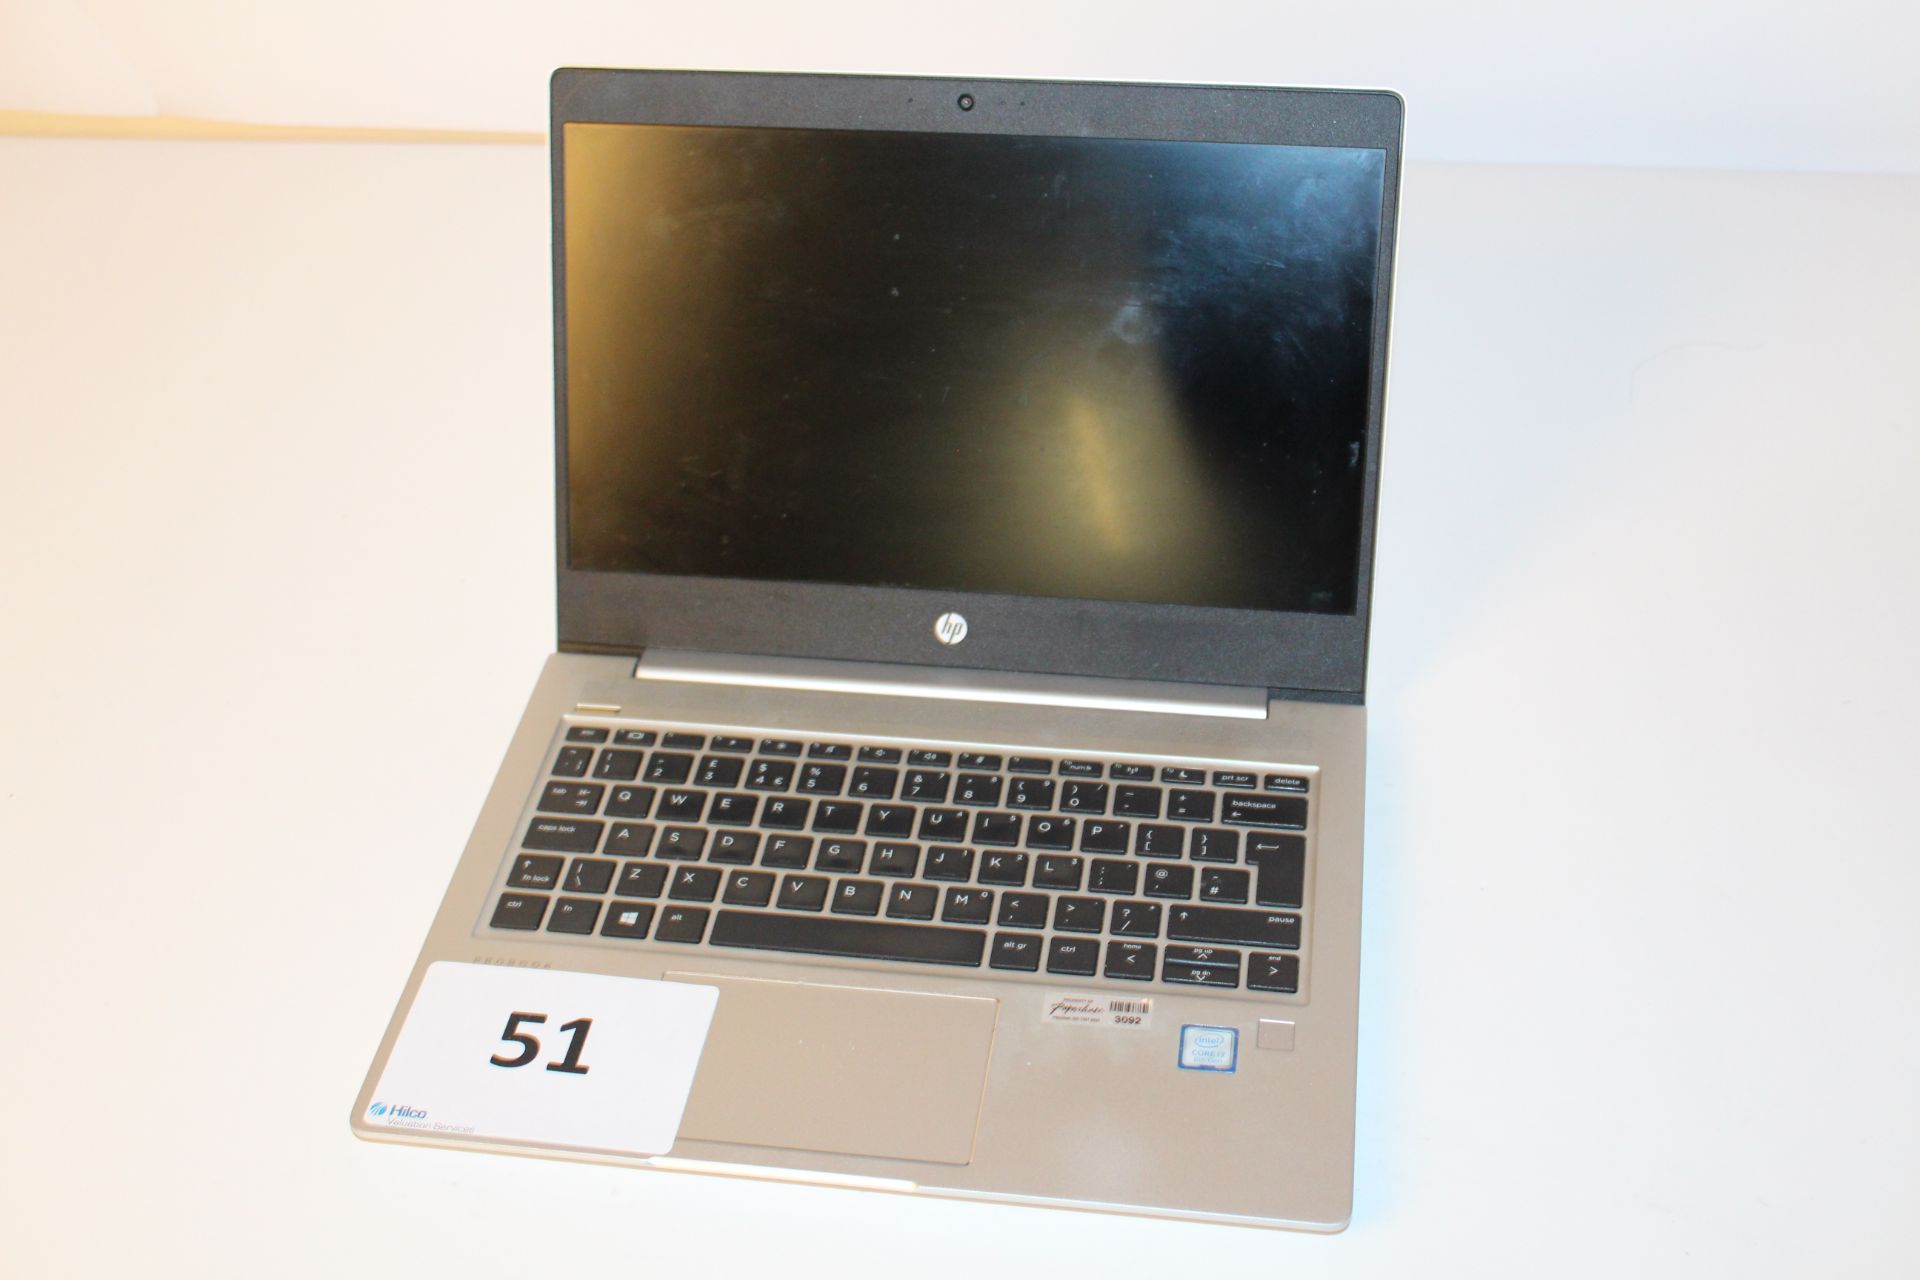 HP ProBook 430 G6 Core i7 Laptop Computer, S/N 5CD117R67. No charger